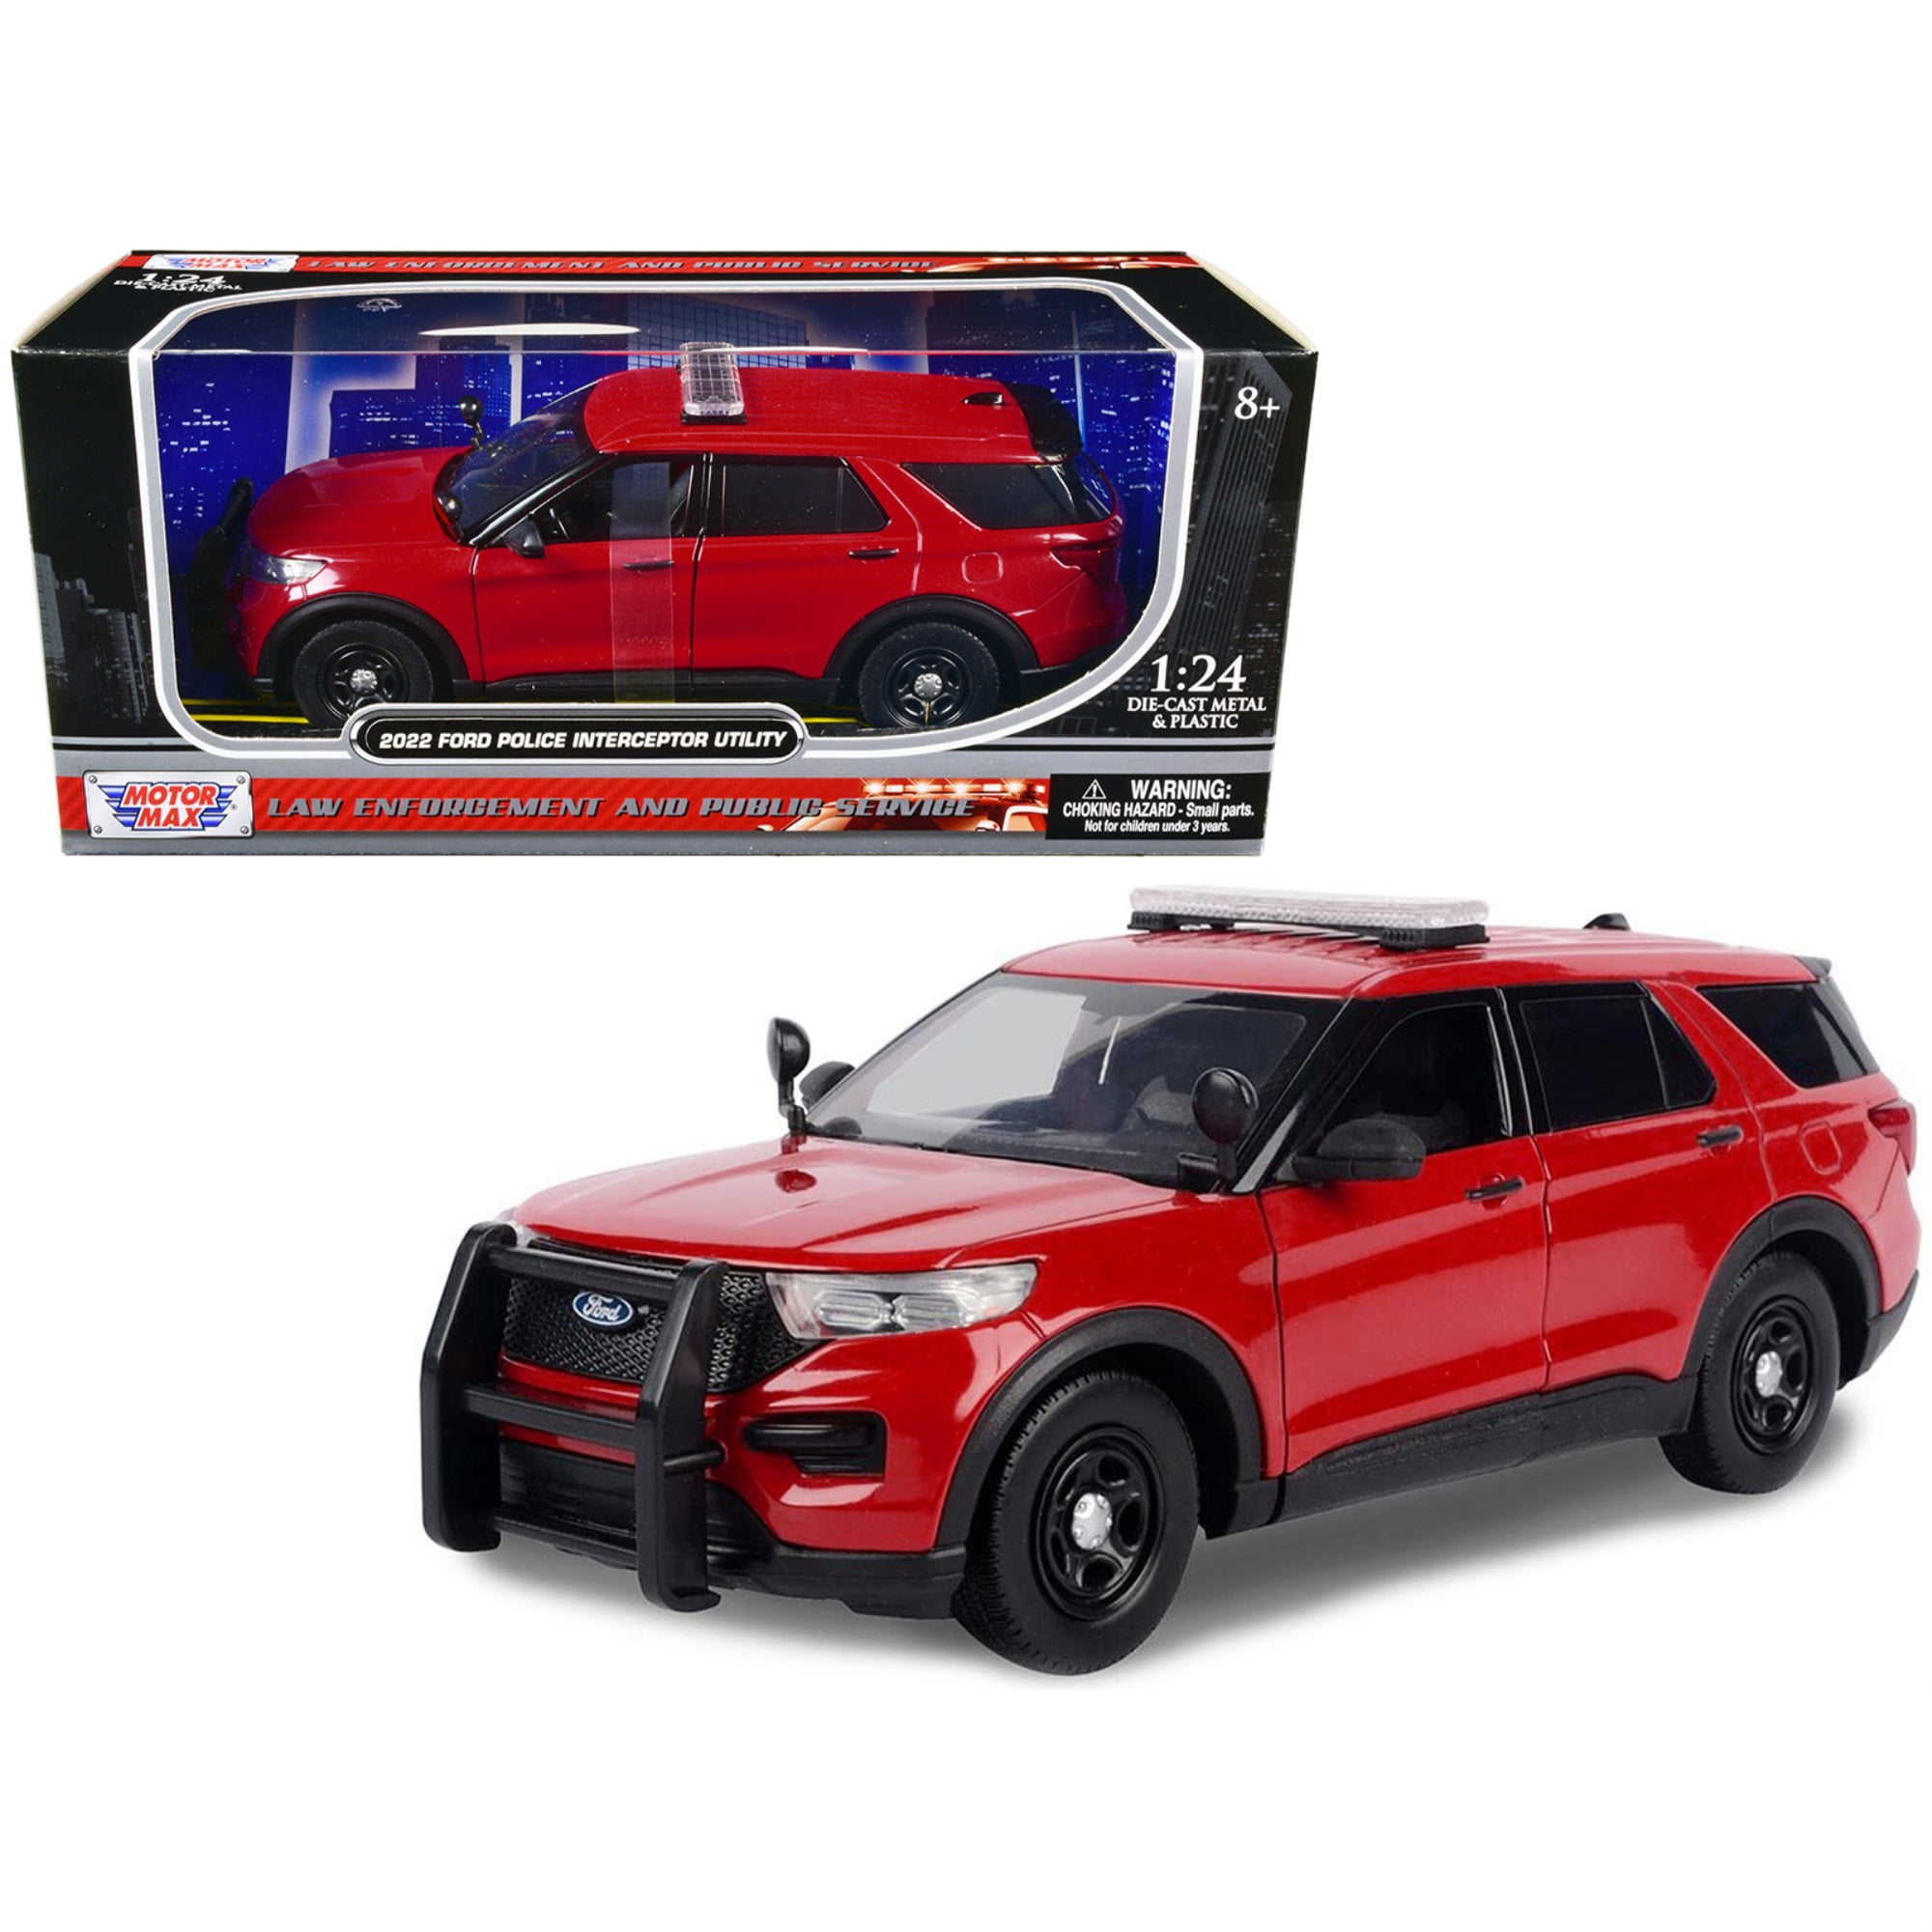 76988R 2022 Ford Police Interceptor Utility Unmarked 1 by 24 Scale Diecast Model Car, Red -  MOTORMAX